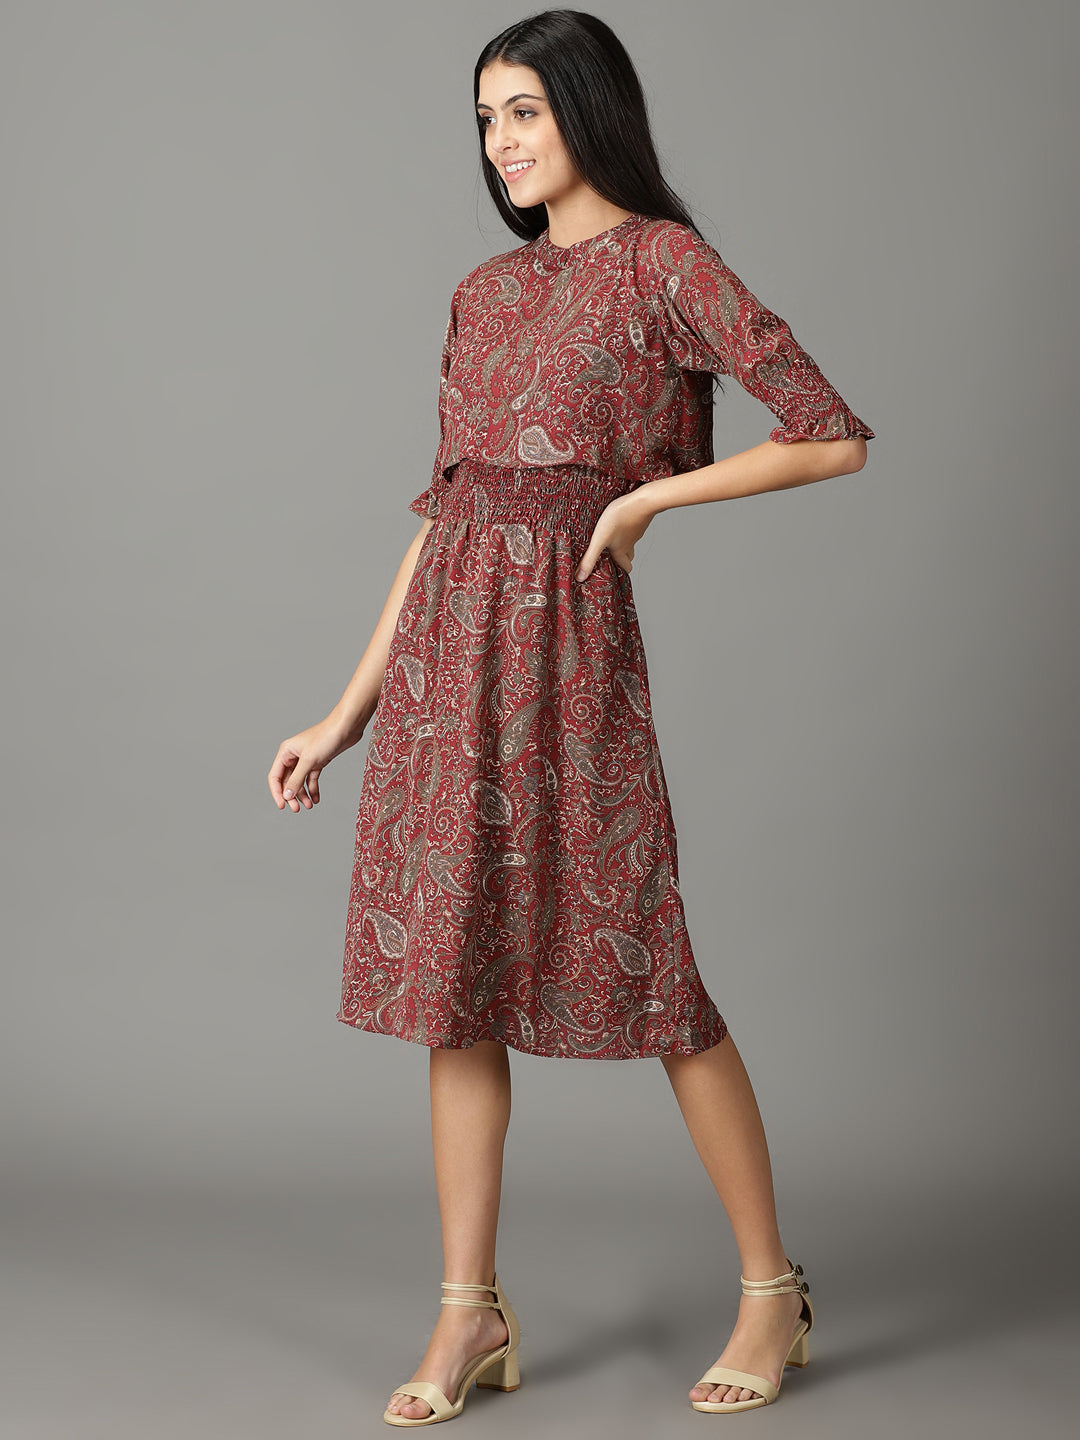 Women's Maroon Printed Fit and Flare Dress